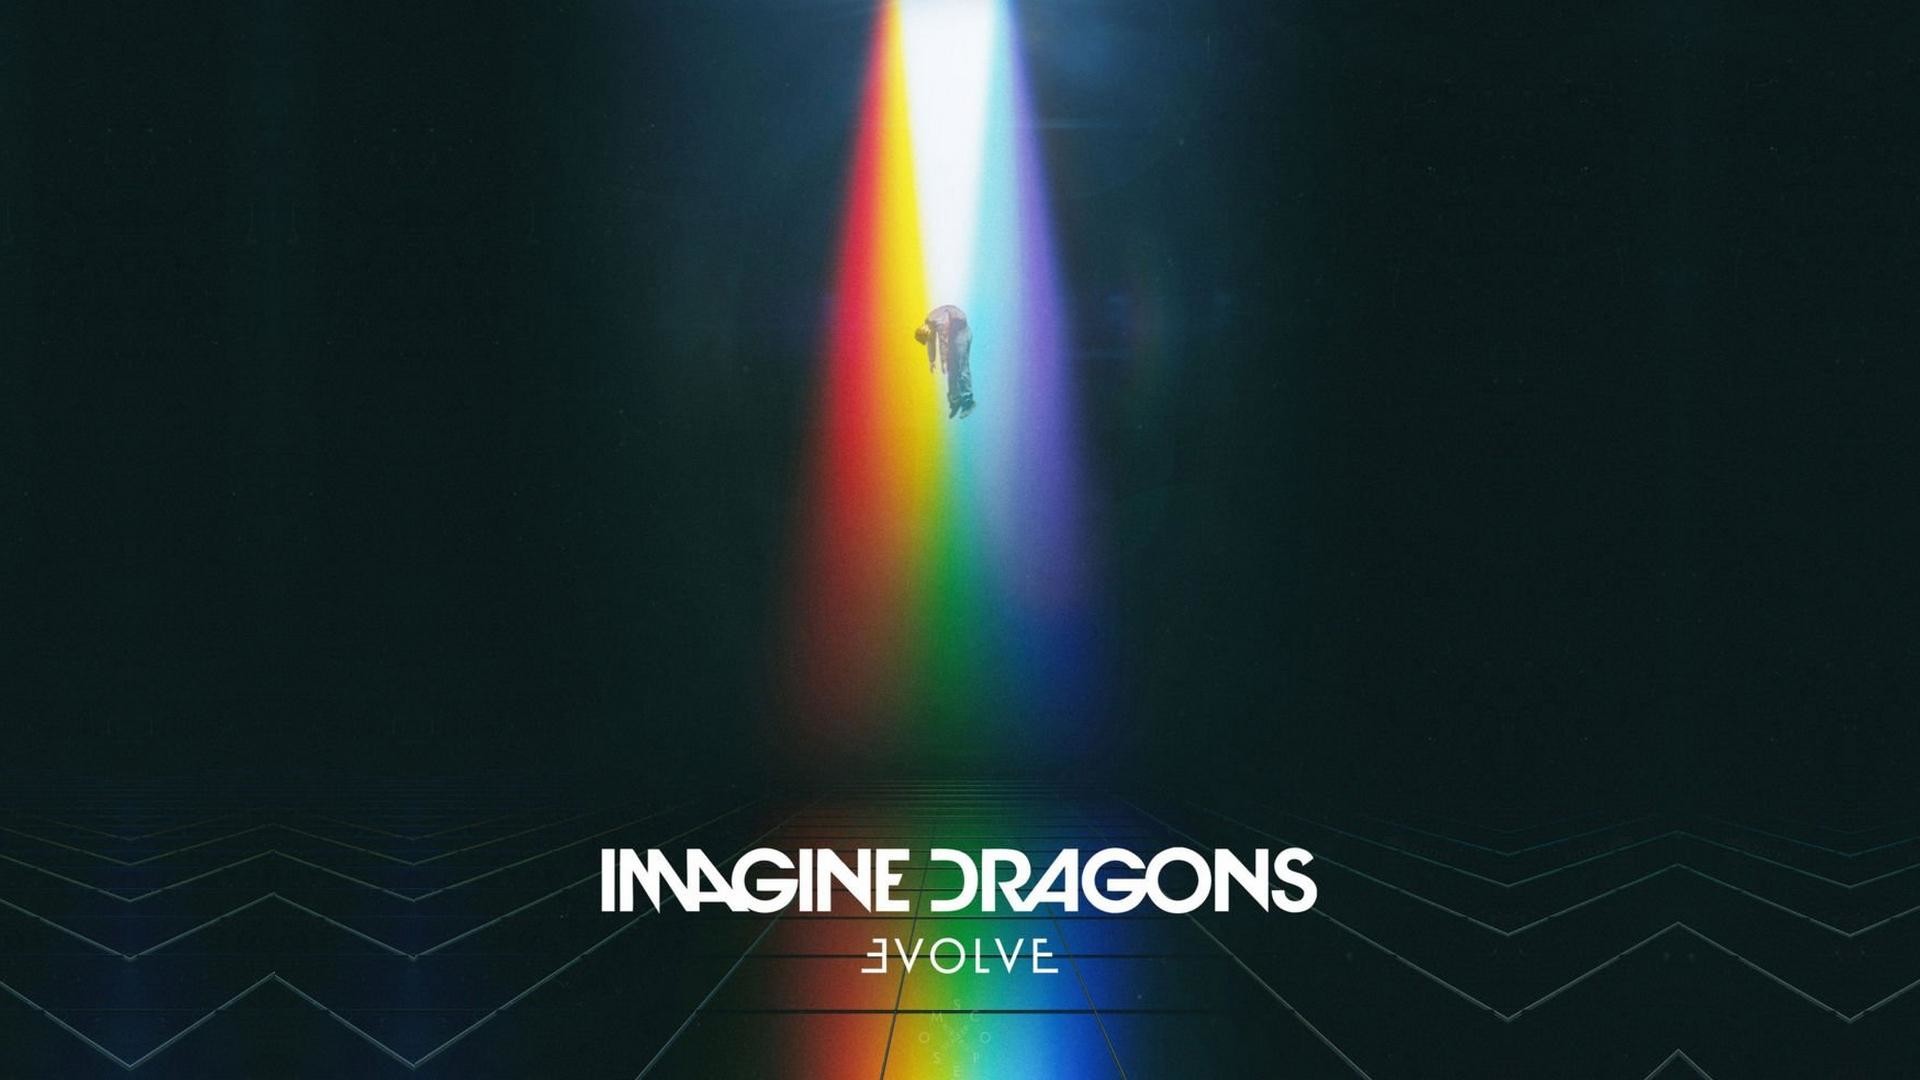 1920x1080, Imagine Dragons Wallpapers - Don T Know Why Imagine Dragons - HD Wallpaper 